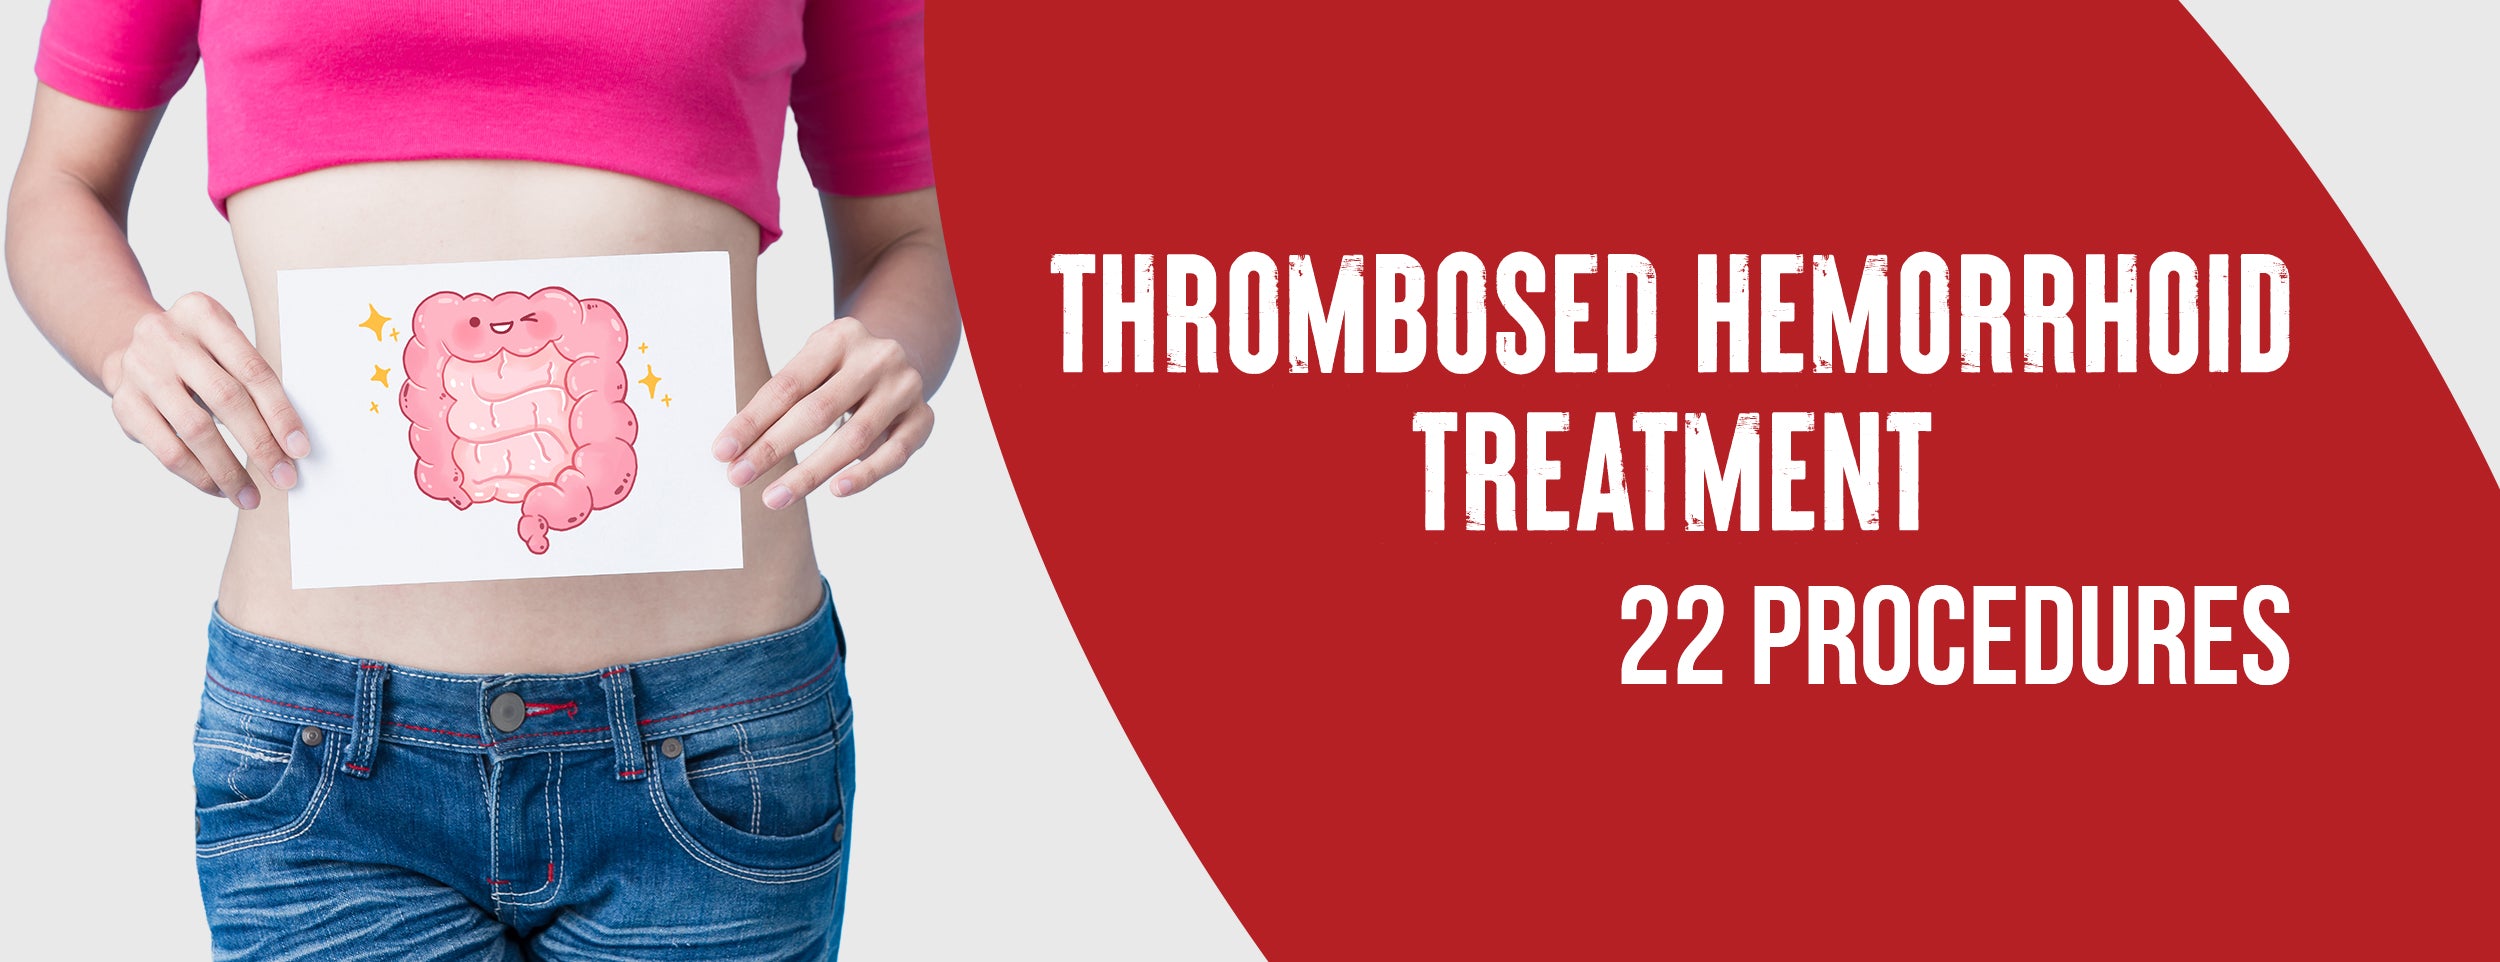 The five most effective medical treatments for thrombosed hemorrhoids